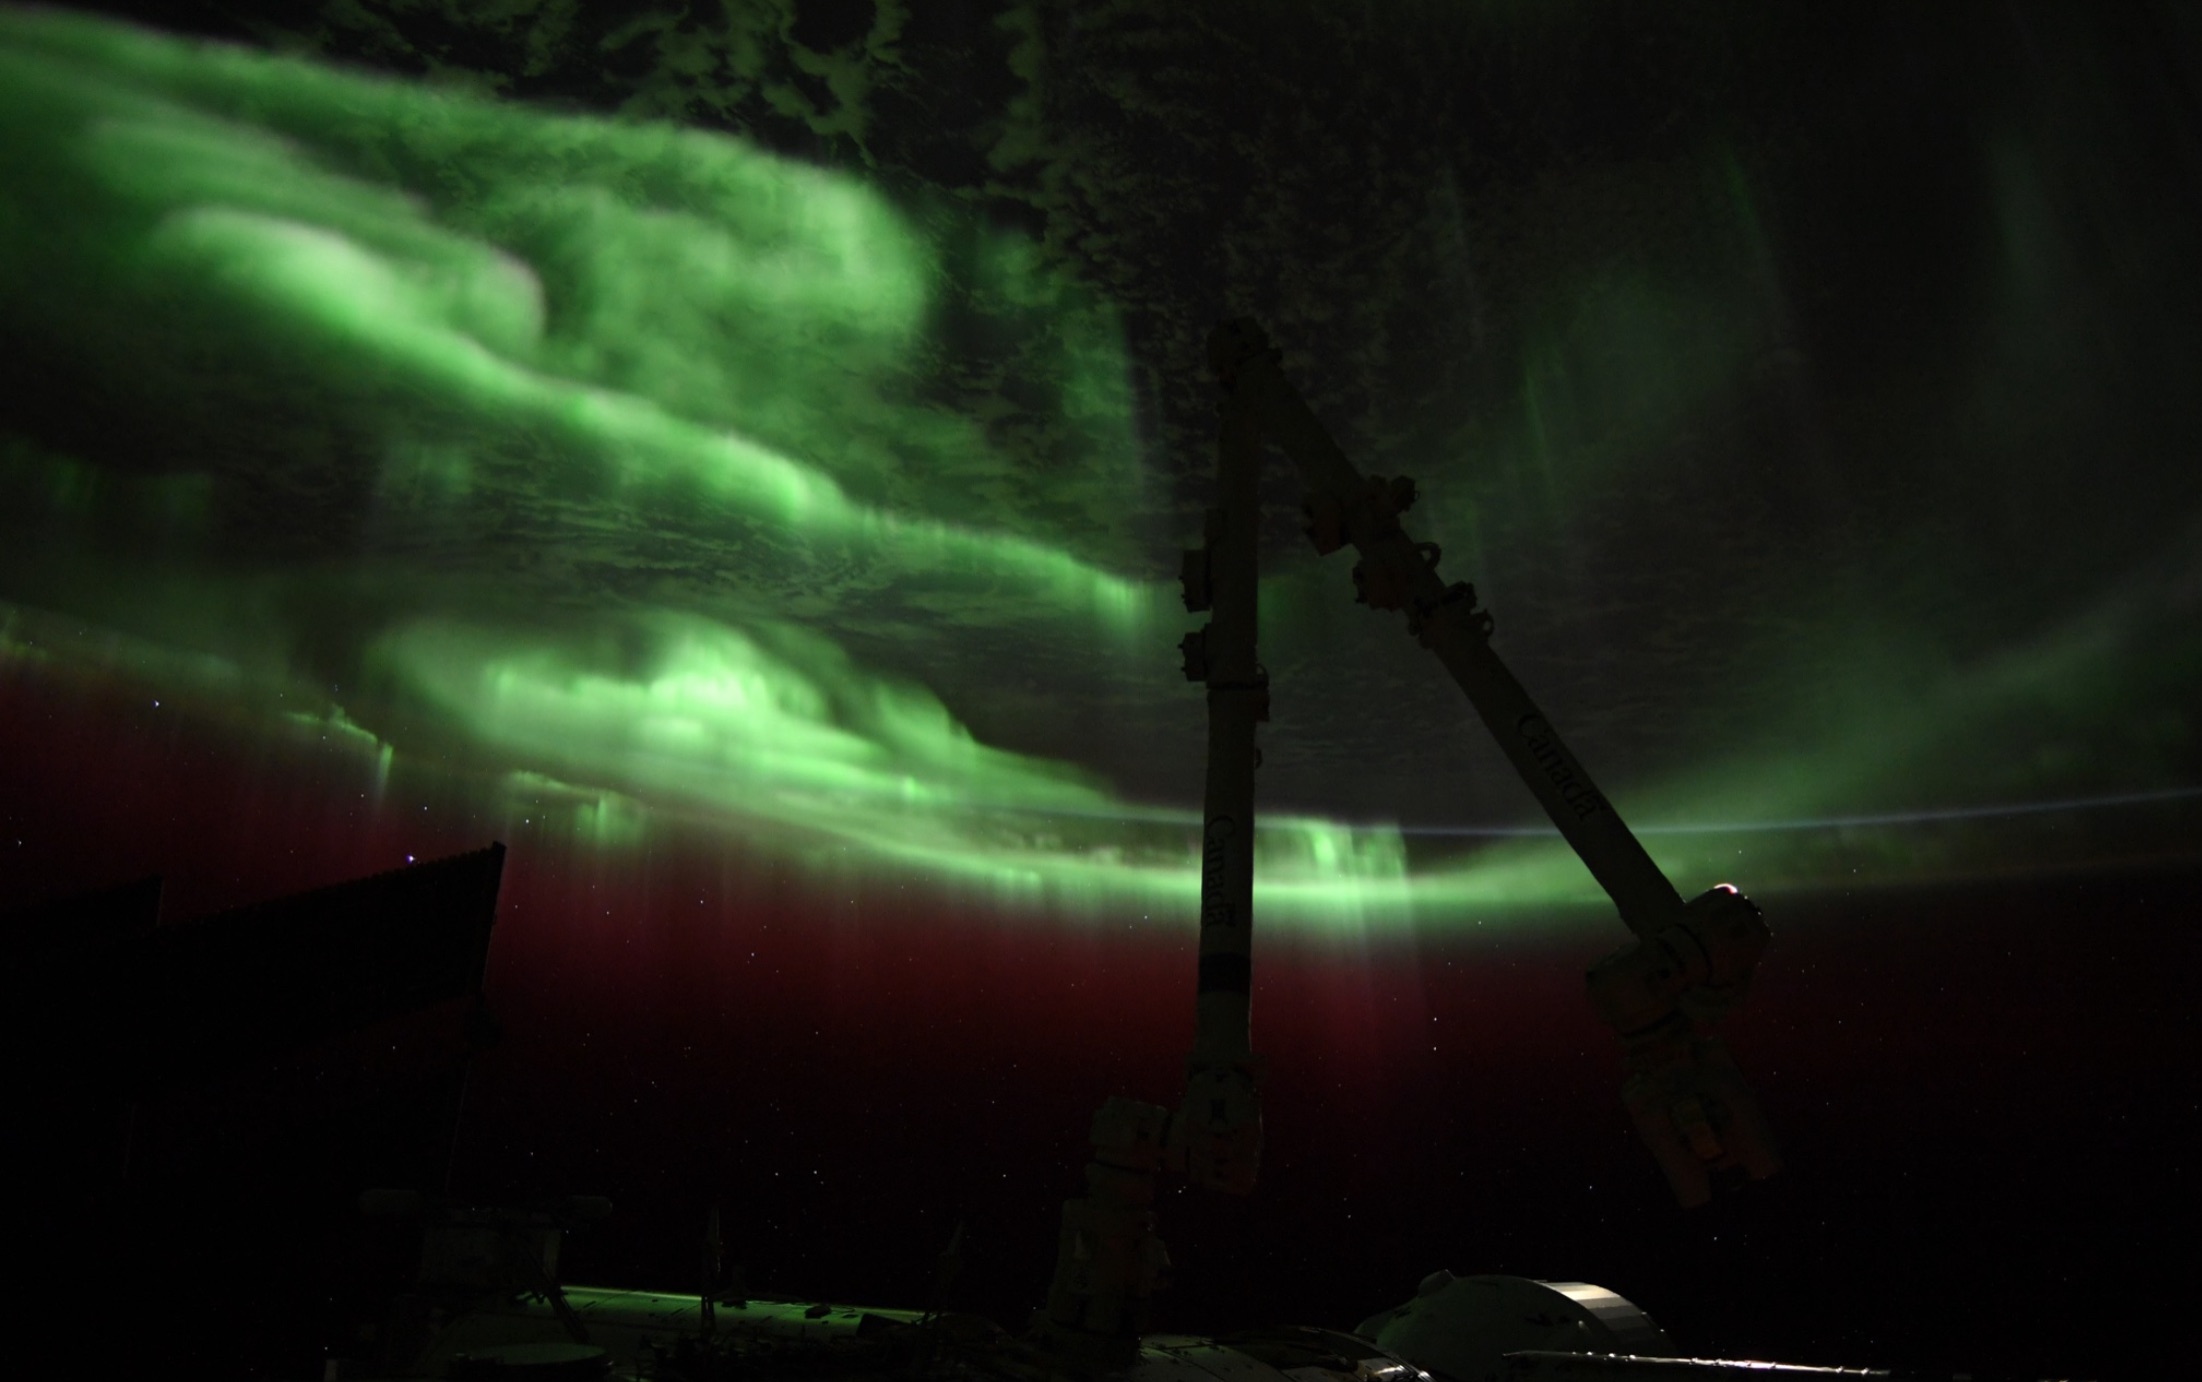 green auroras with an international space station structure in shadow, in the foreground